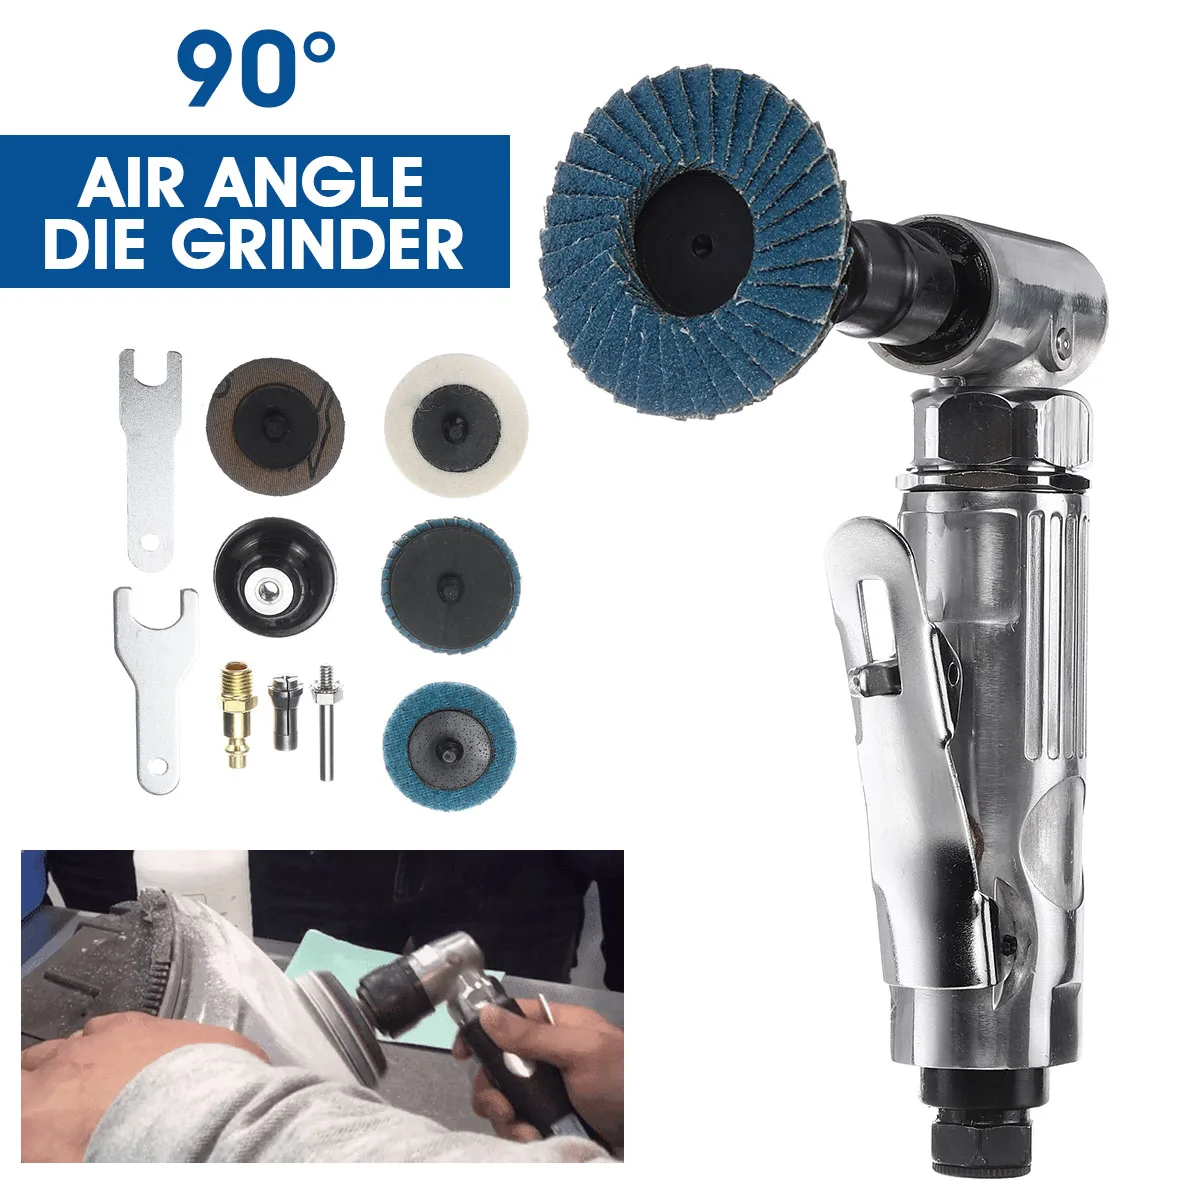 1/4" Air Angle Die Grinder Pneumatic Grinding Machine Cut Off Polisher Mill Tool 